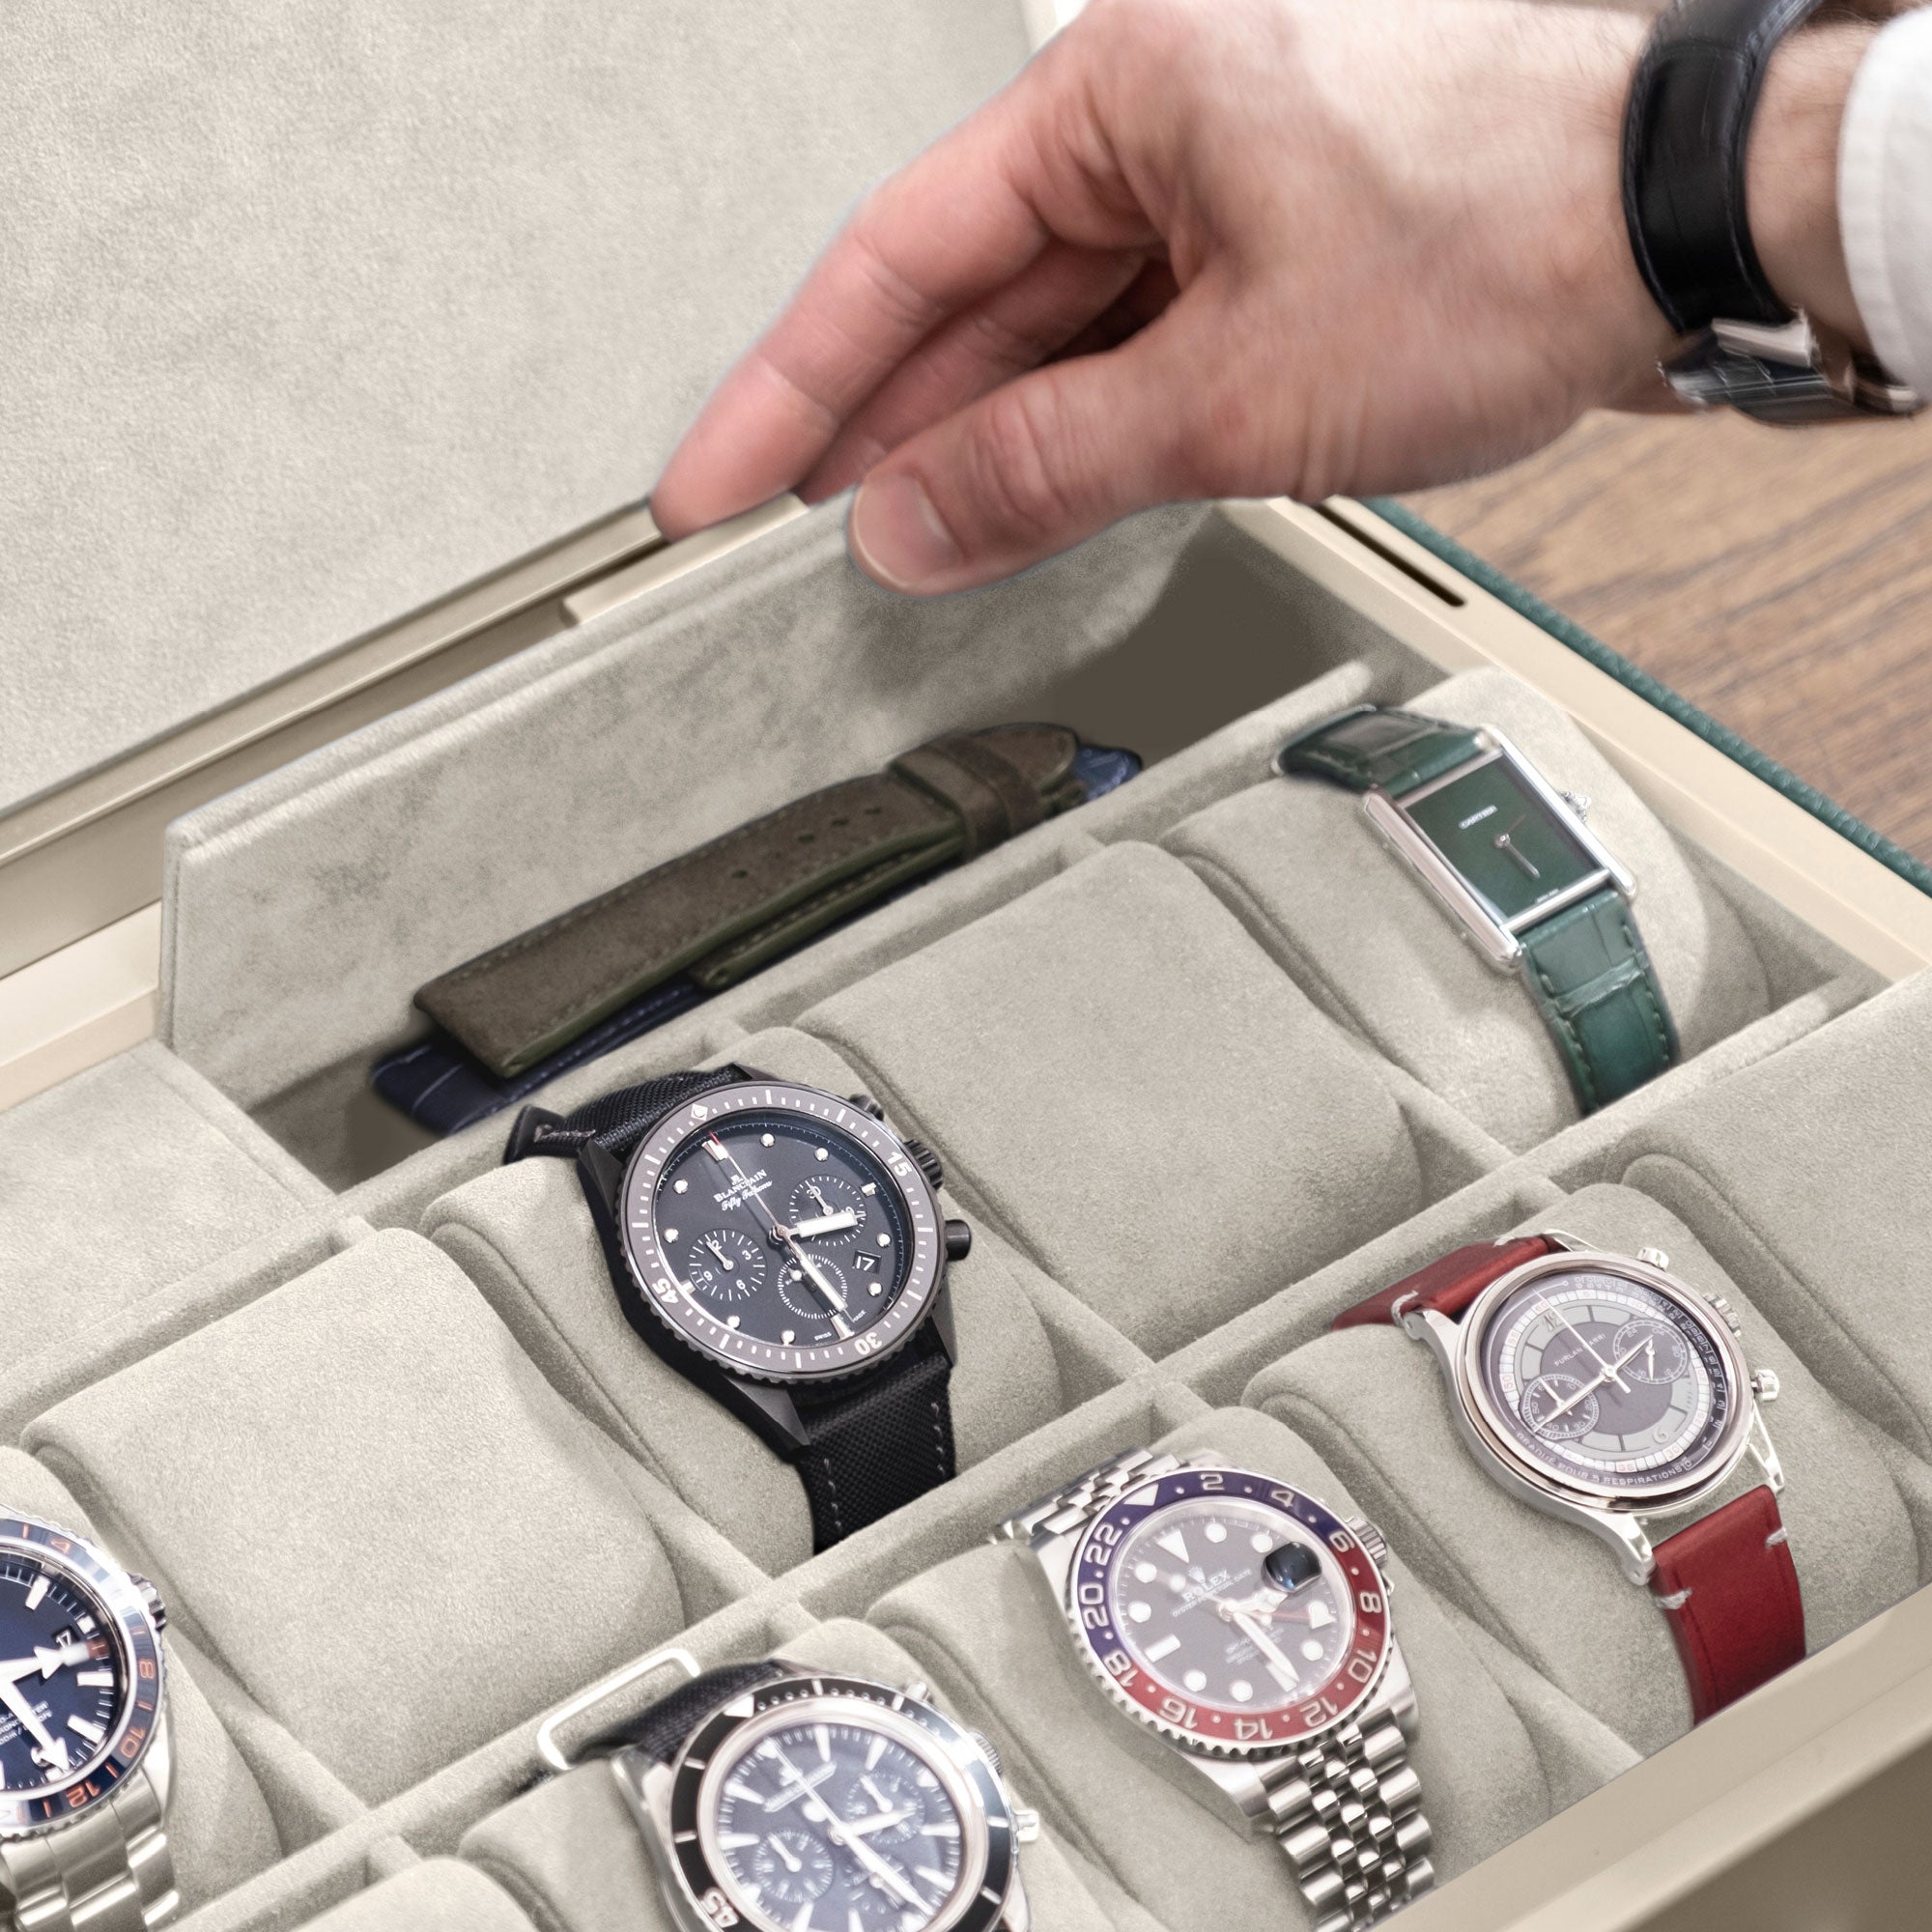 Man opening additional storage compartment of his Spence 12 Watch box holding his collection of luxury watches